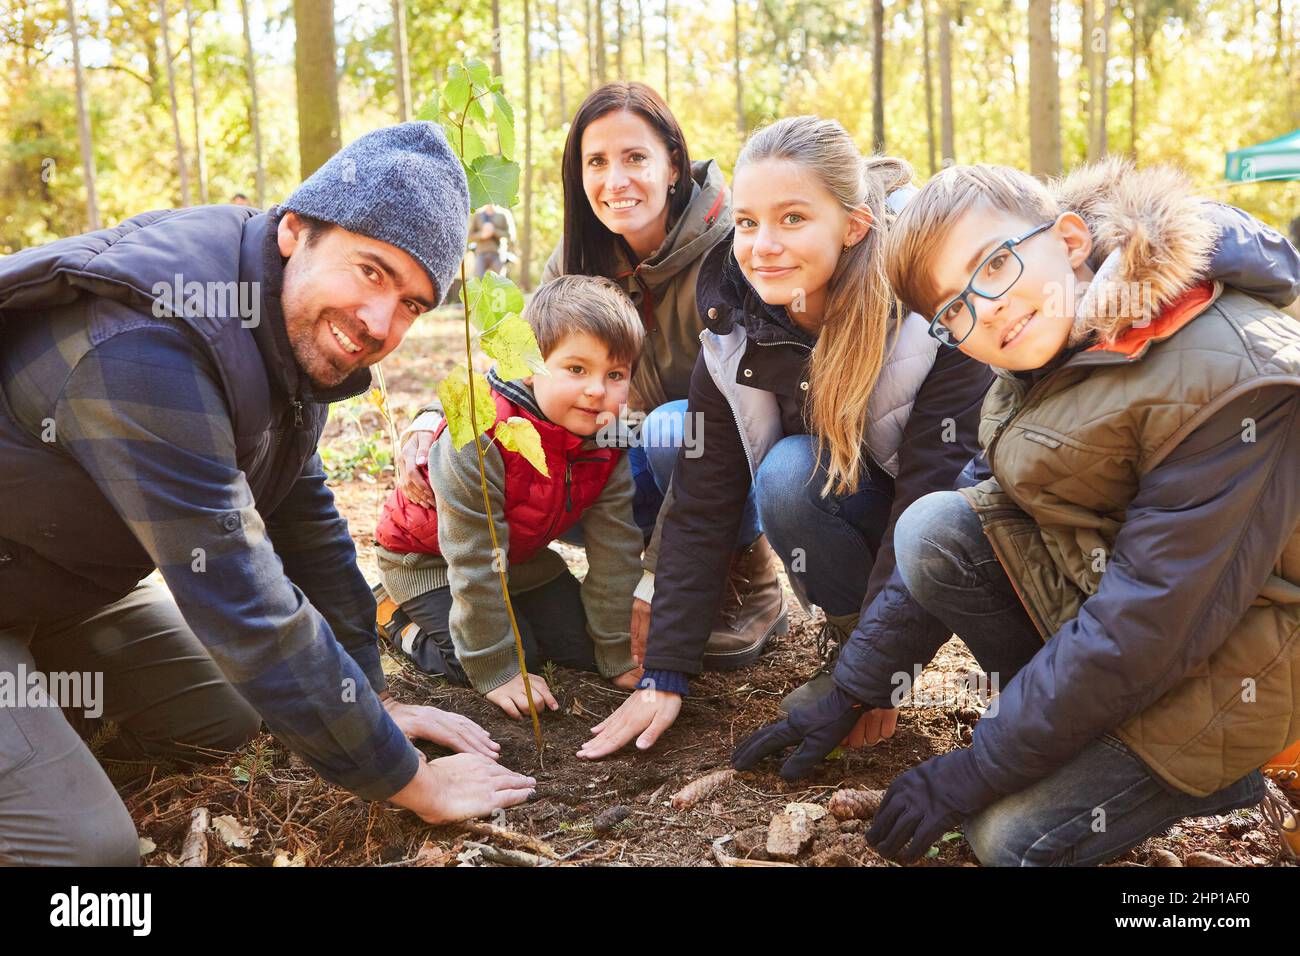 Family and children plant trees in the forest together for conservation and sustainability Stock Photo